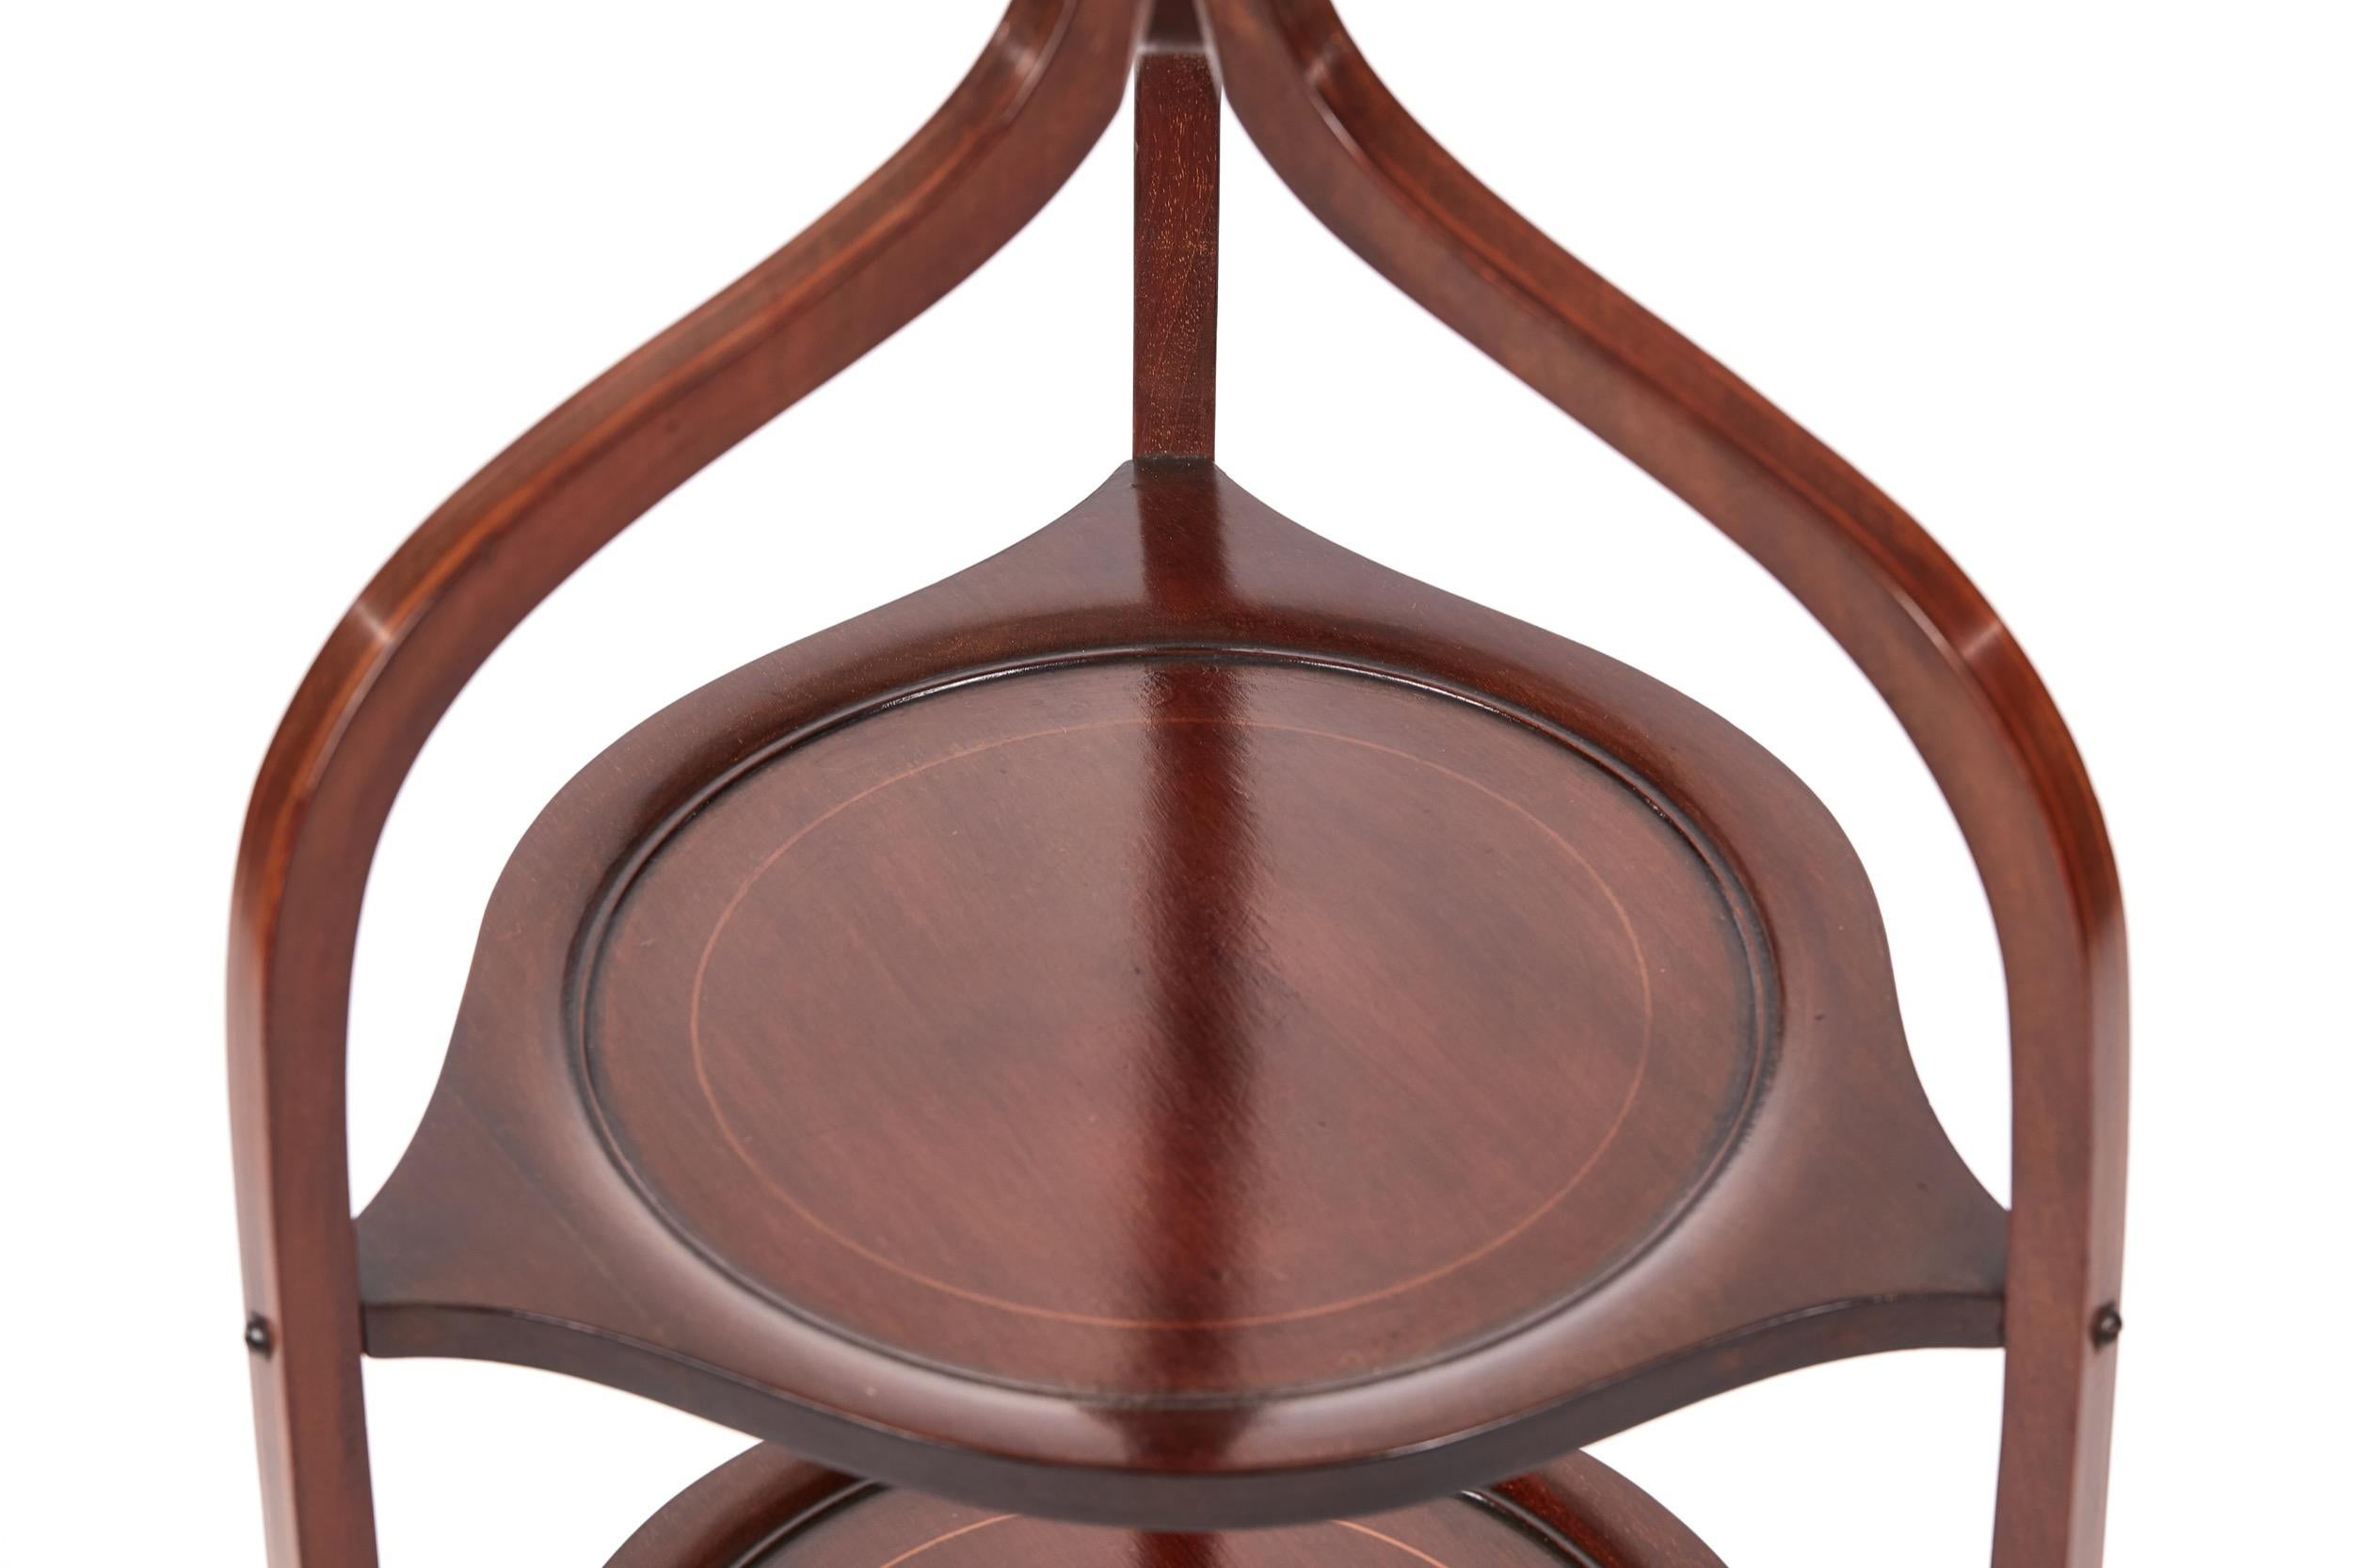 European Edwardian Mahogany Inlaid 3-Tier Cake Stand For Sale